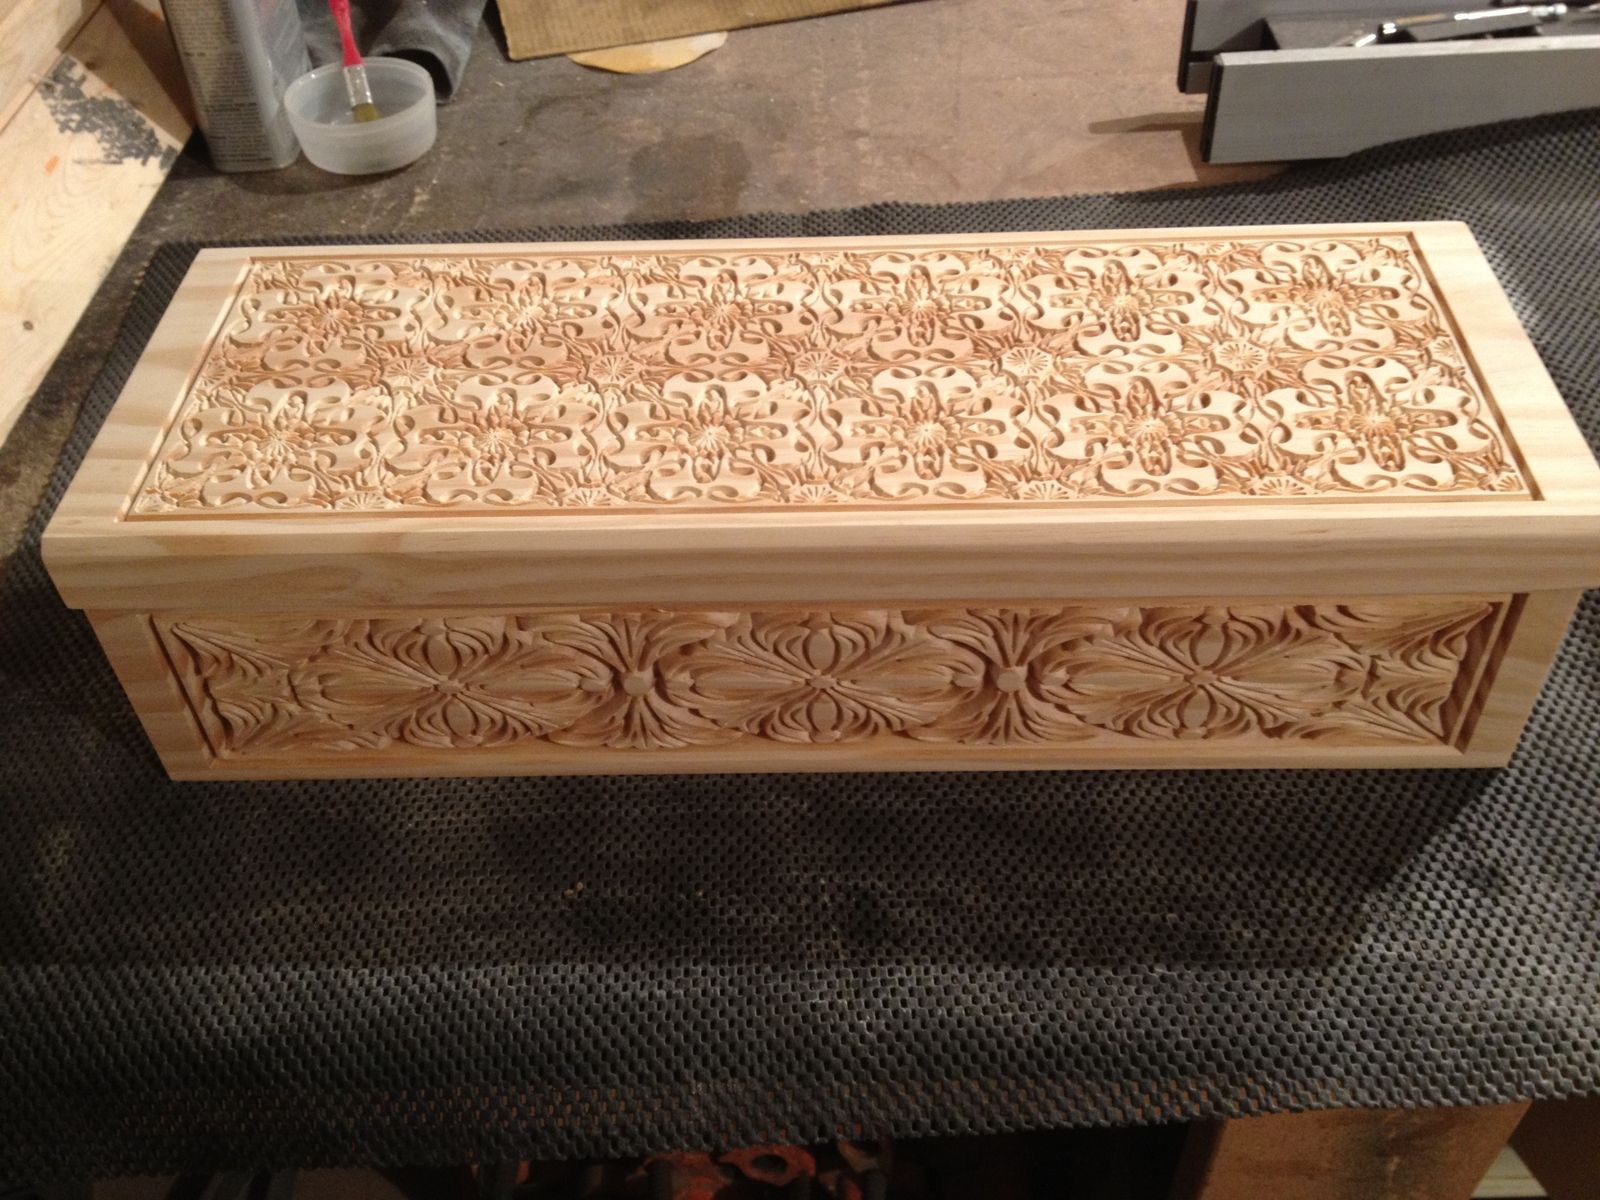 Handmade Carved Wooden Boxes by Raw Creations Cnc | CustomMade.com